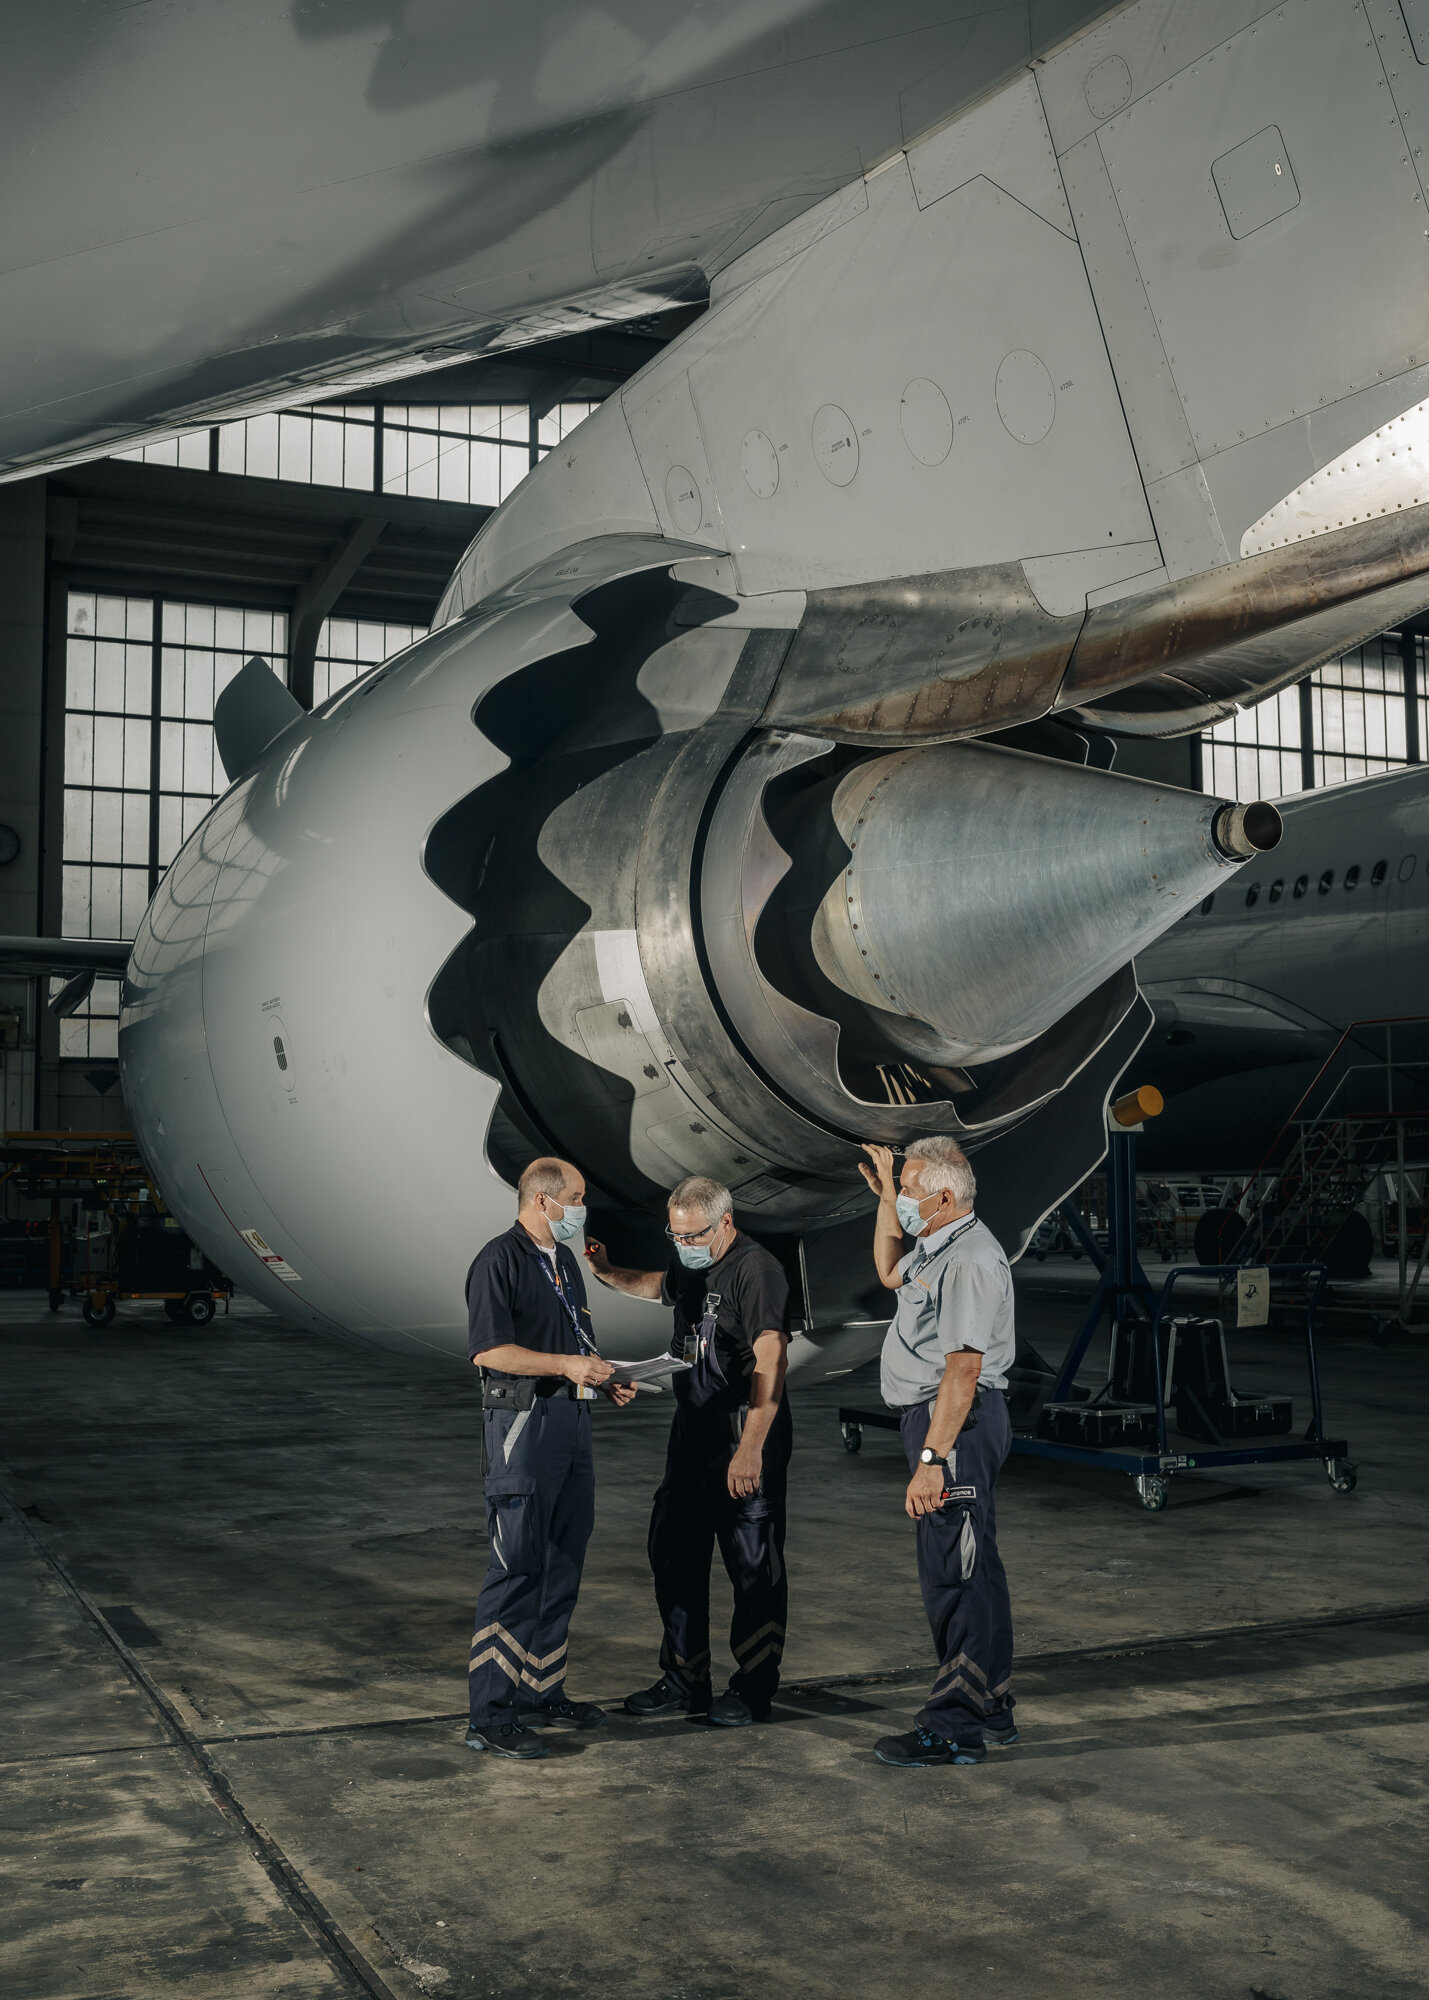  Aircraft mechanics Klaus Kolling, Josef Stapp, Bernd Hötschl check the engine of a Boeing 747-8 that was parked during lockdowns and the reduced air traffic. 